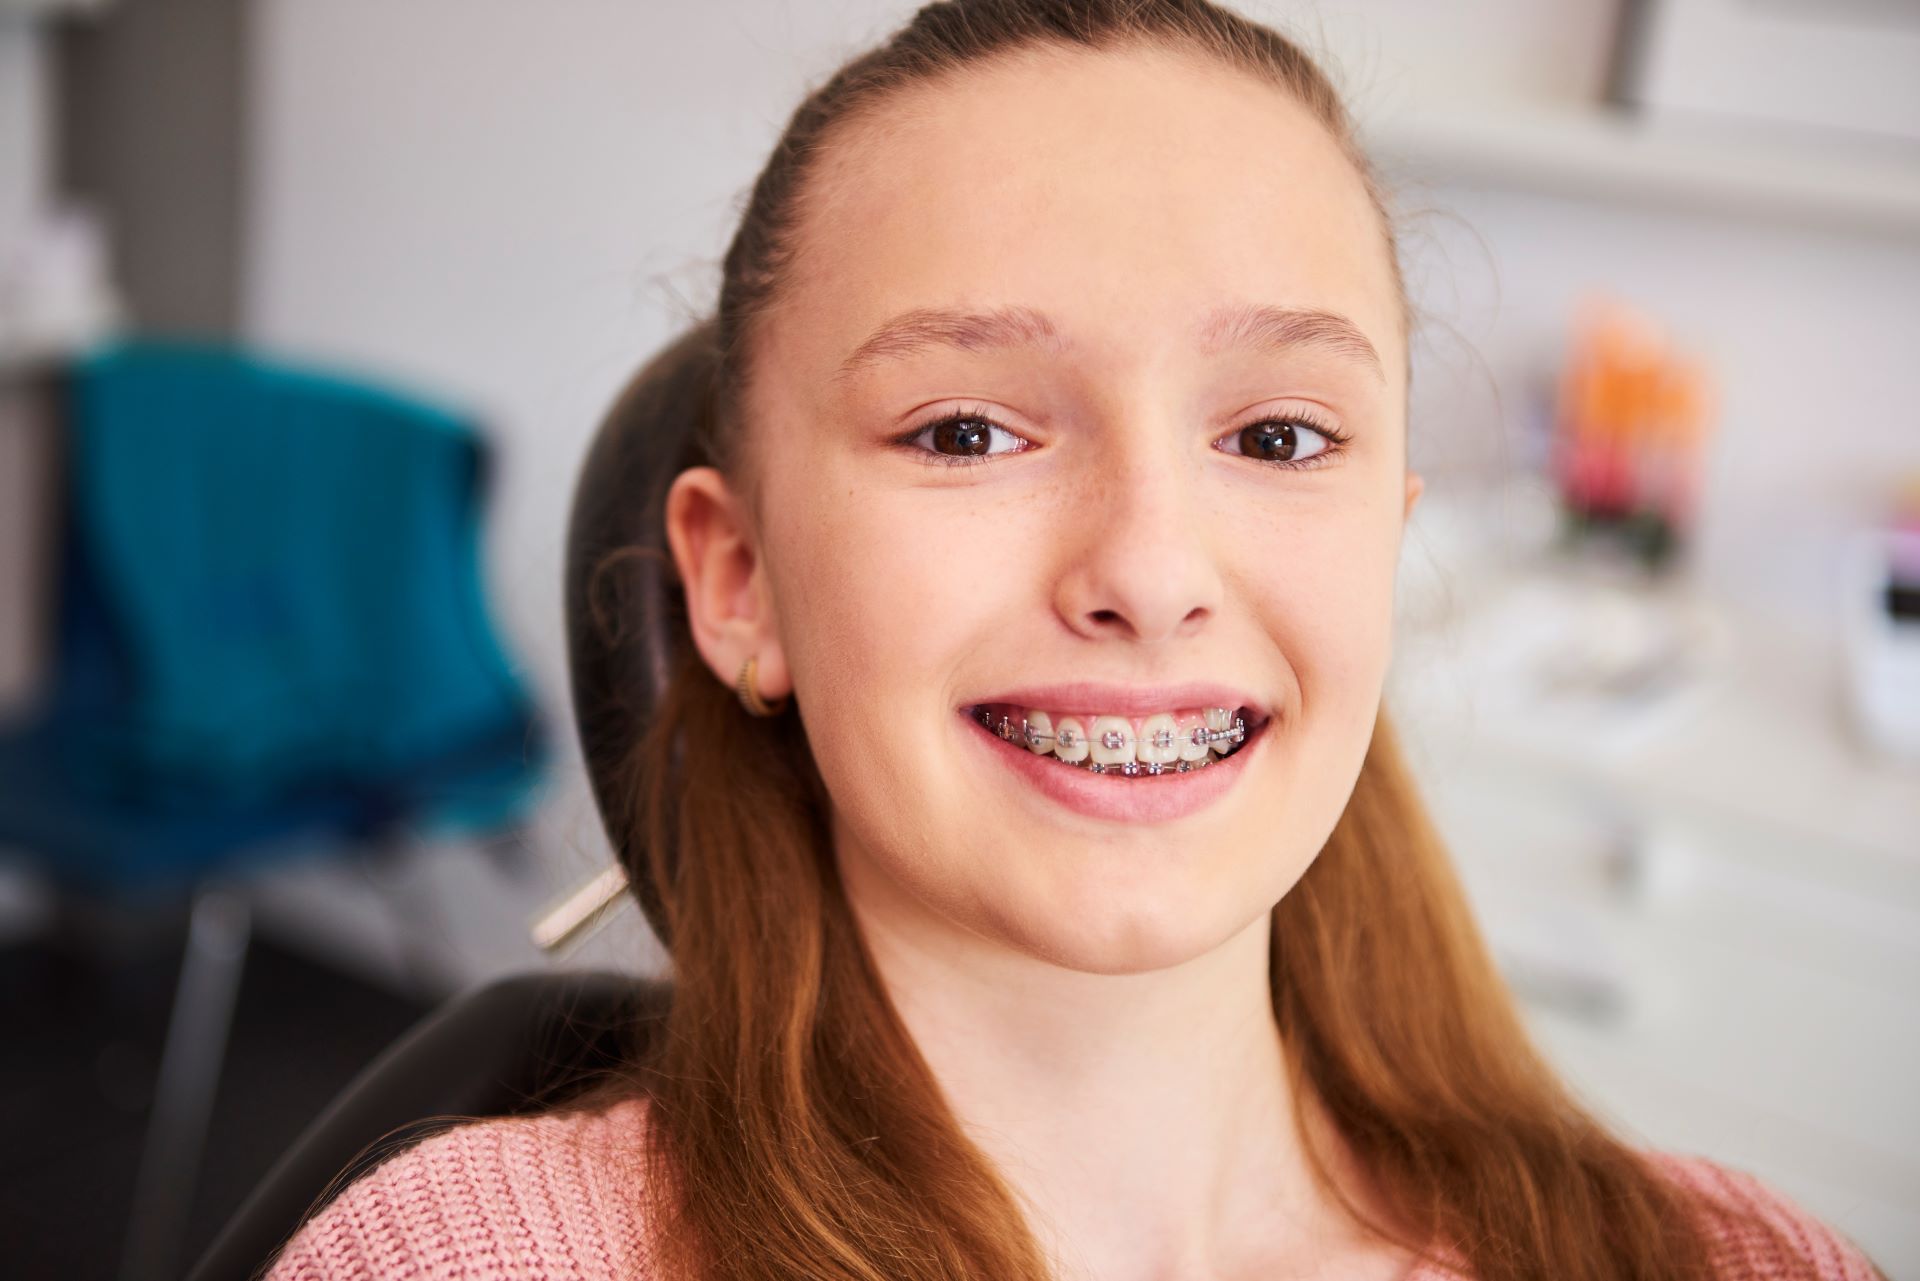 girl smiling with braces at dentist